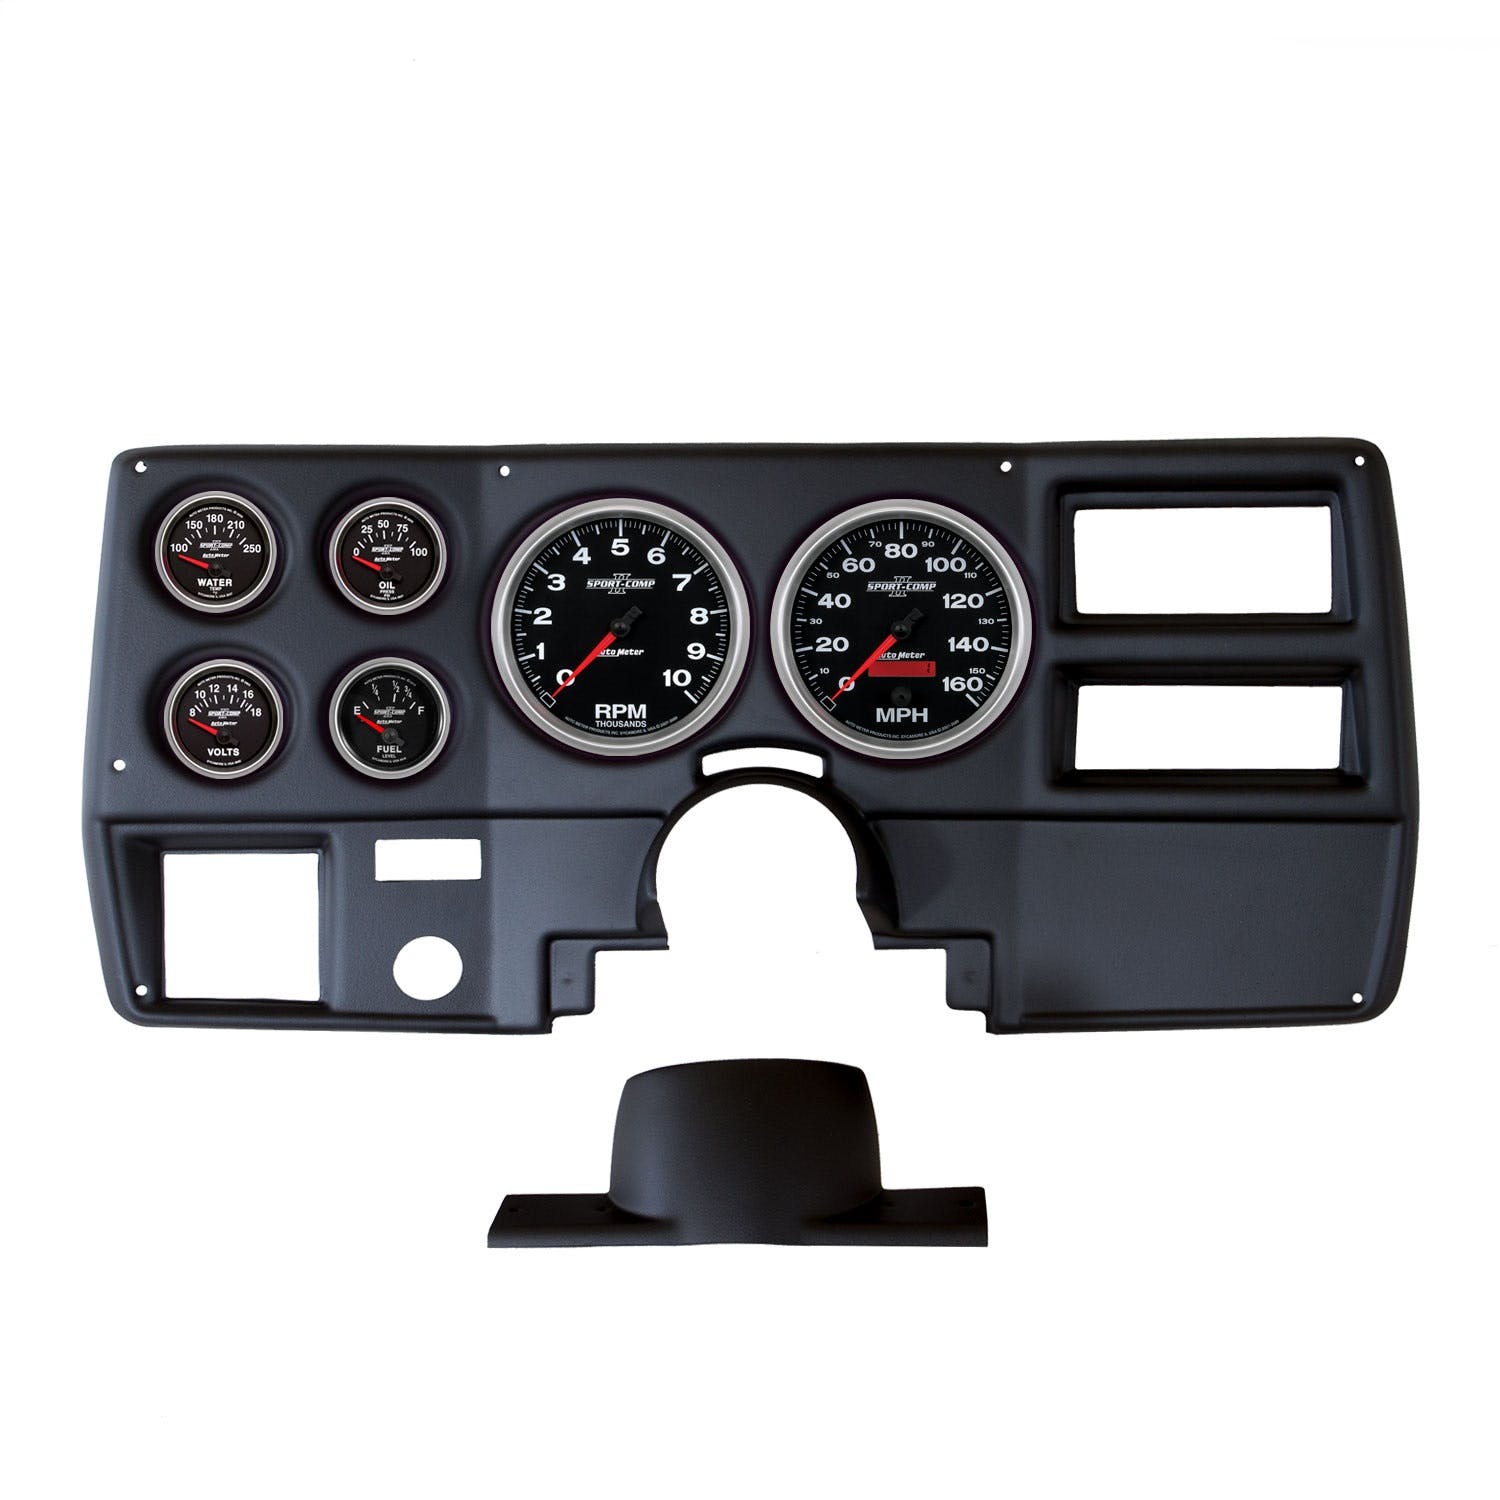 AutoMeter Products 2137-12 6 Gauge Direct-Fit Dash Kit, Chevy Truck / Suburban 73-83, Sport-Comp II